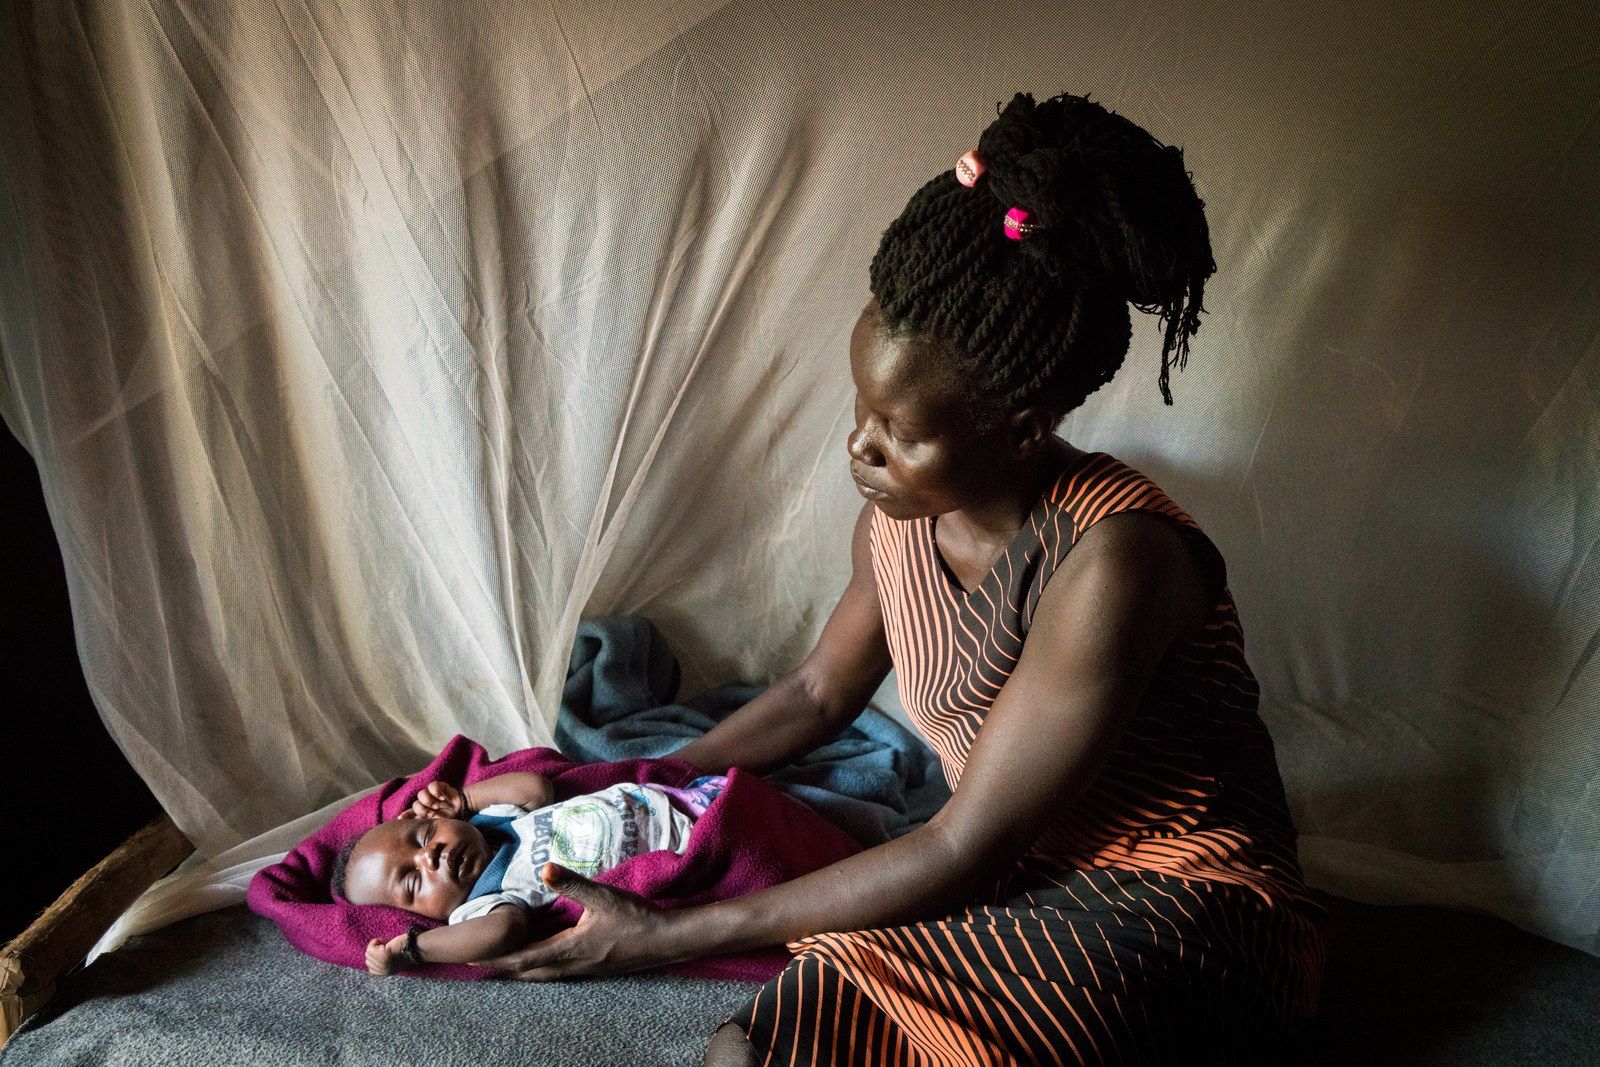 Stella Keji, 18, with her son Nelson in their home in the Bidi Bidi settlement for refugees who have fled from South Sudan to Uganda. Image by Adriane Ohanesian. Uganda, 2019.